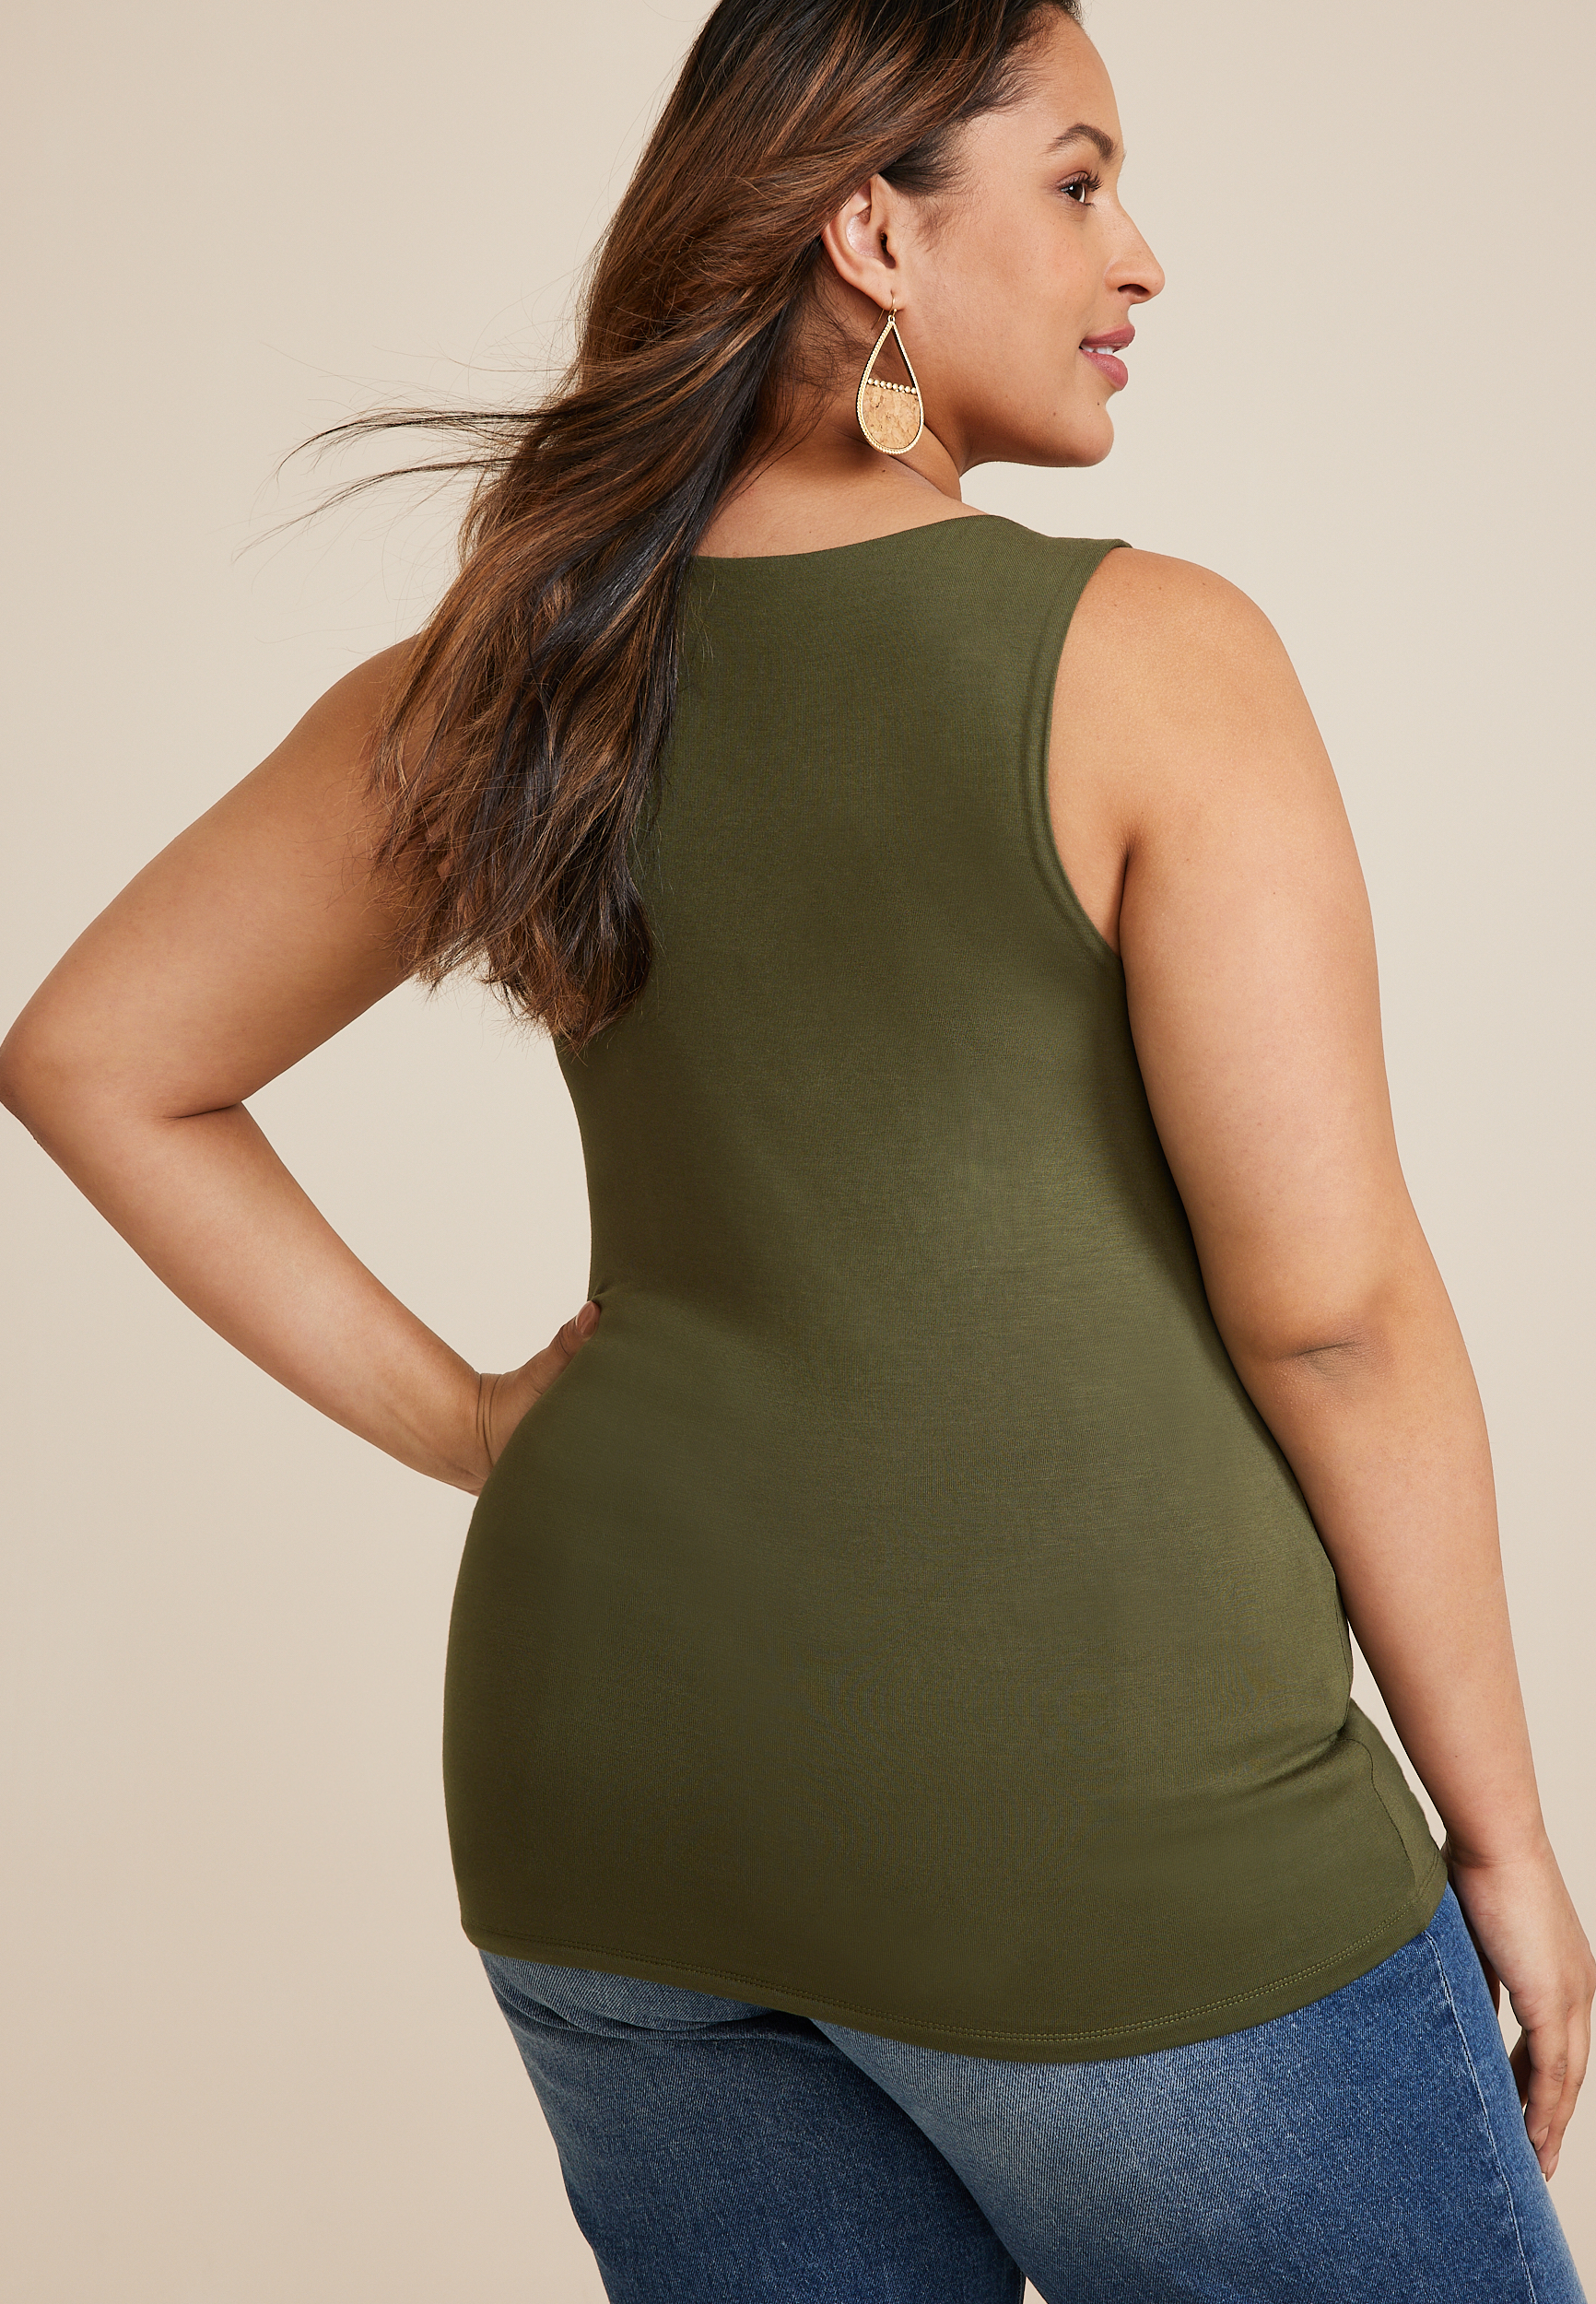 Walnut Georgette Double Layer Tank  Plus size tops, Cute plus size clothes,  Layering tank tops